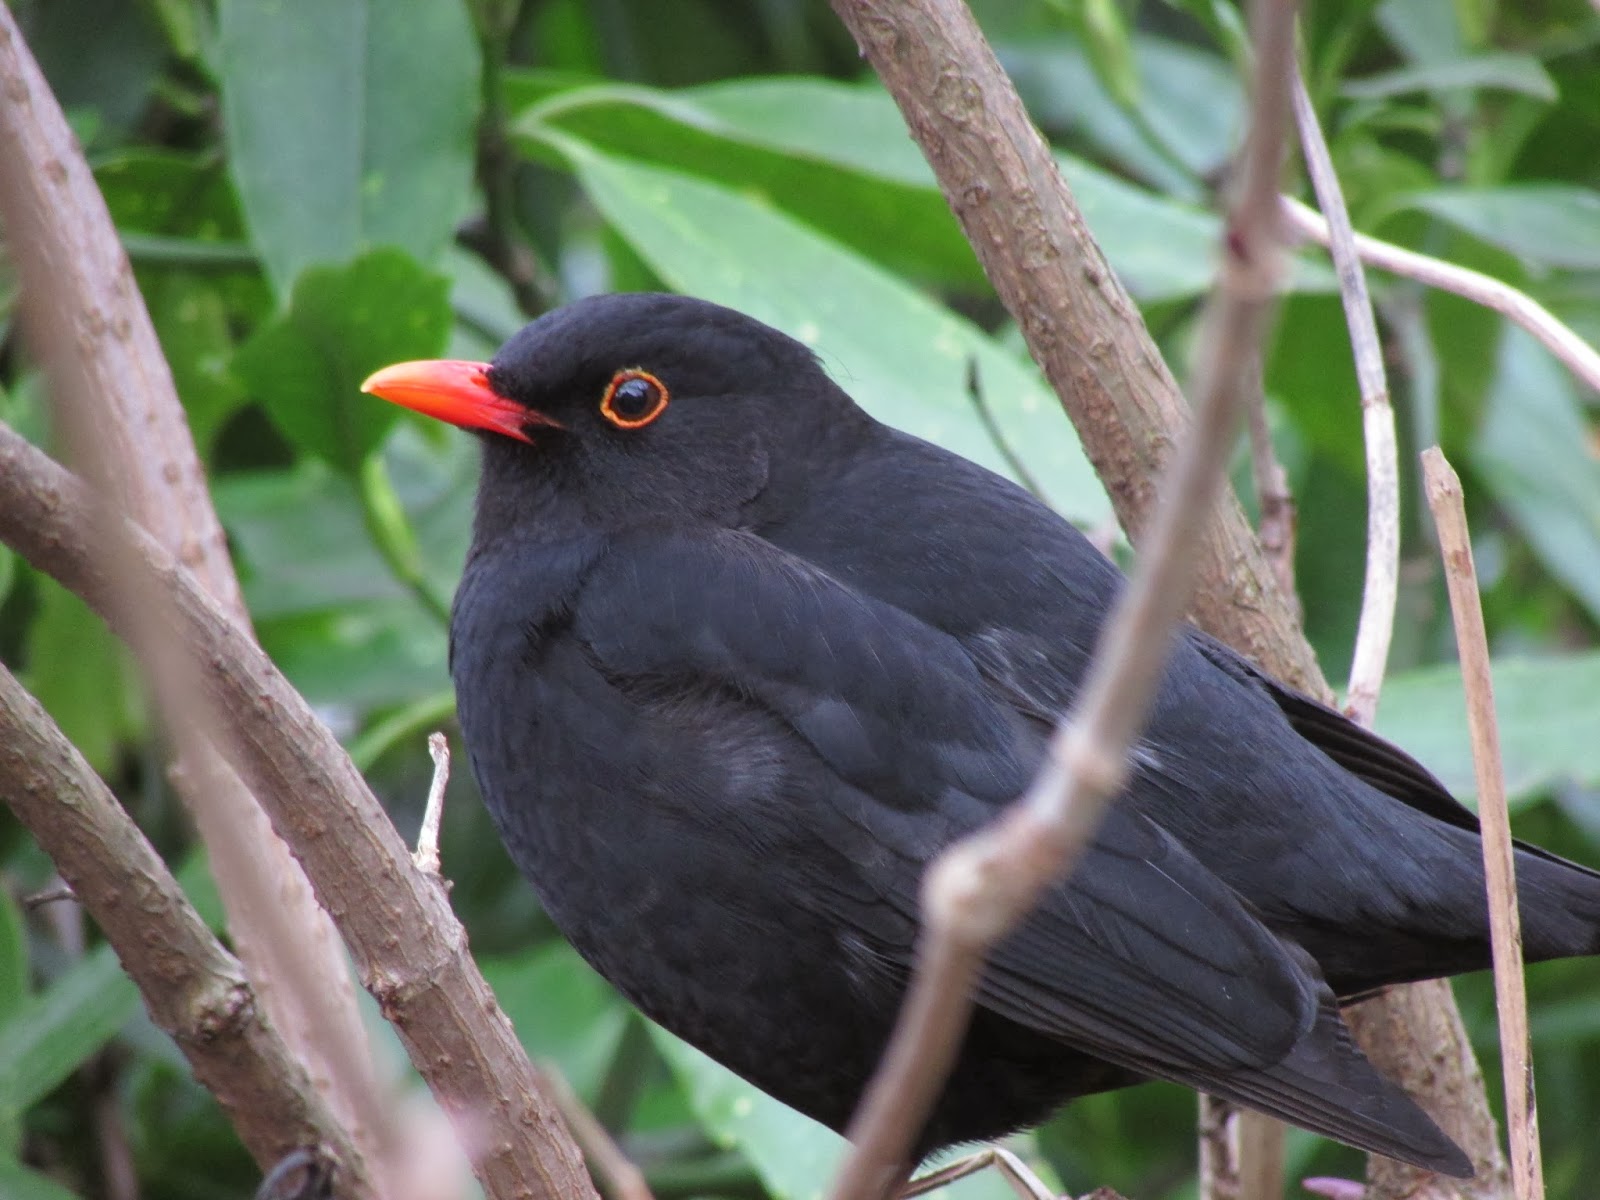 The Rattling Crow: The bill of the blackbird